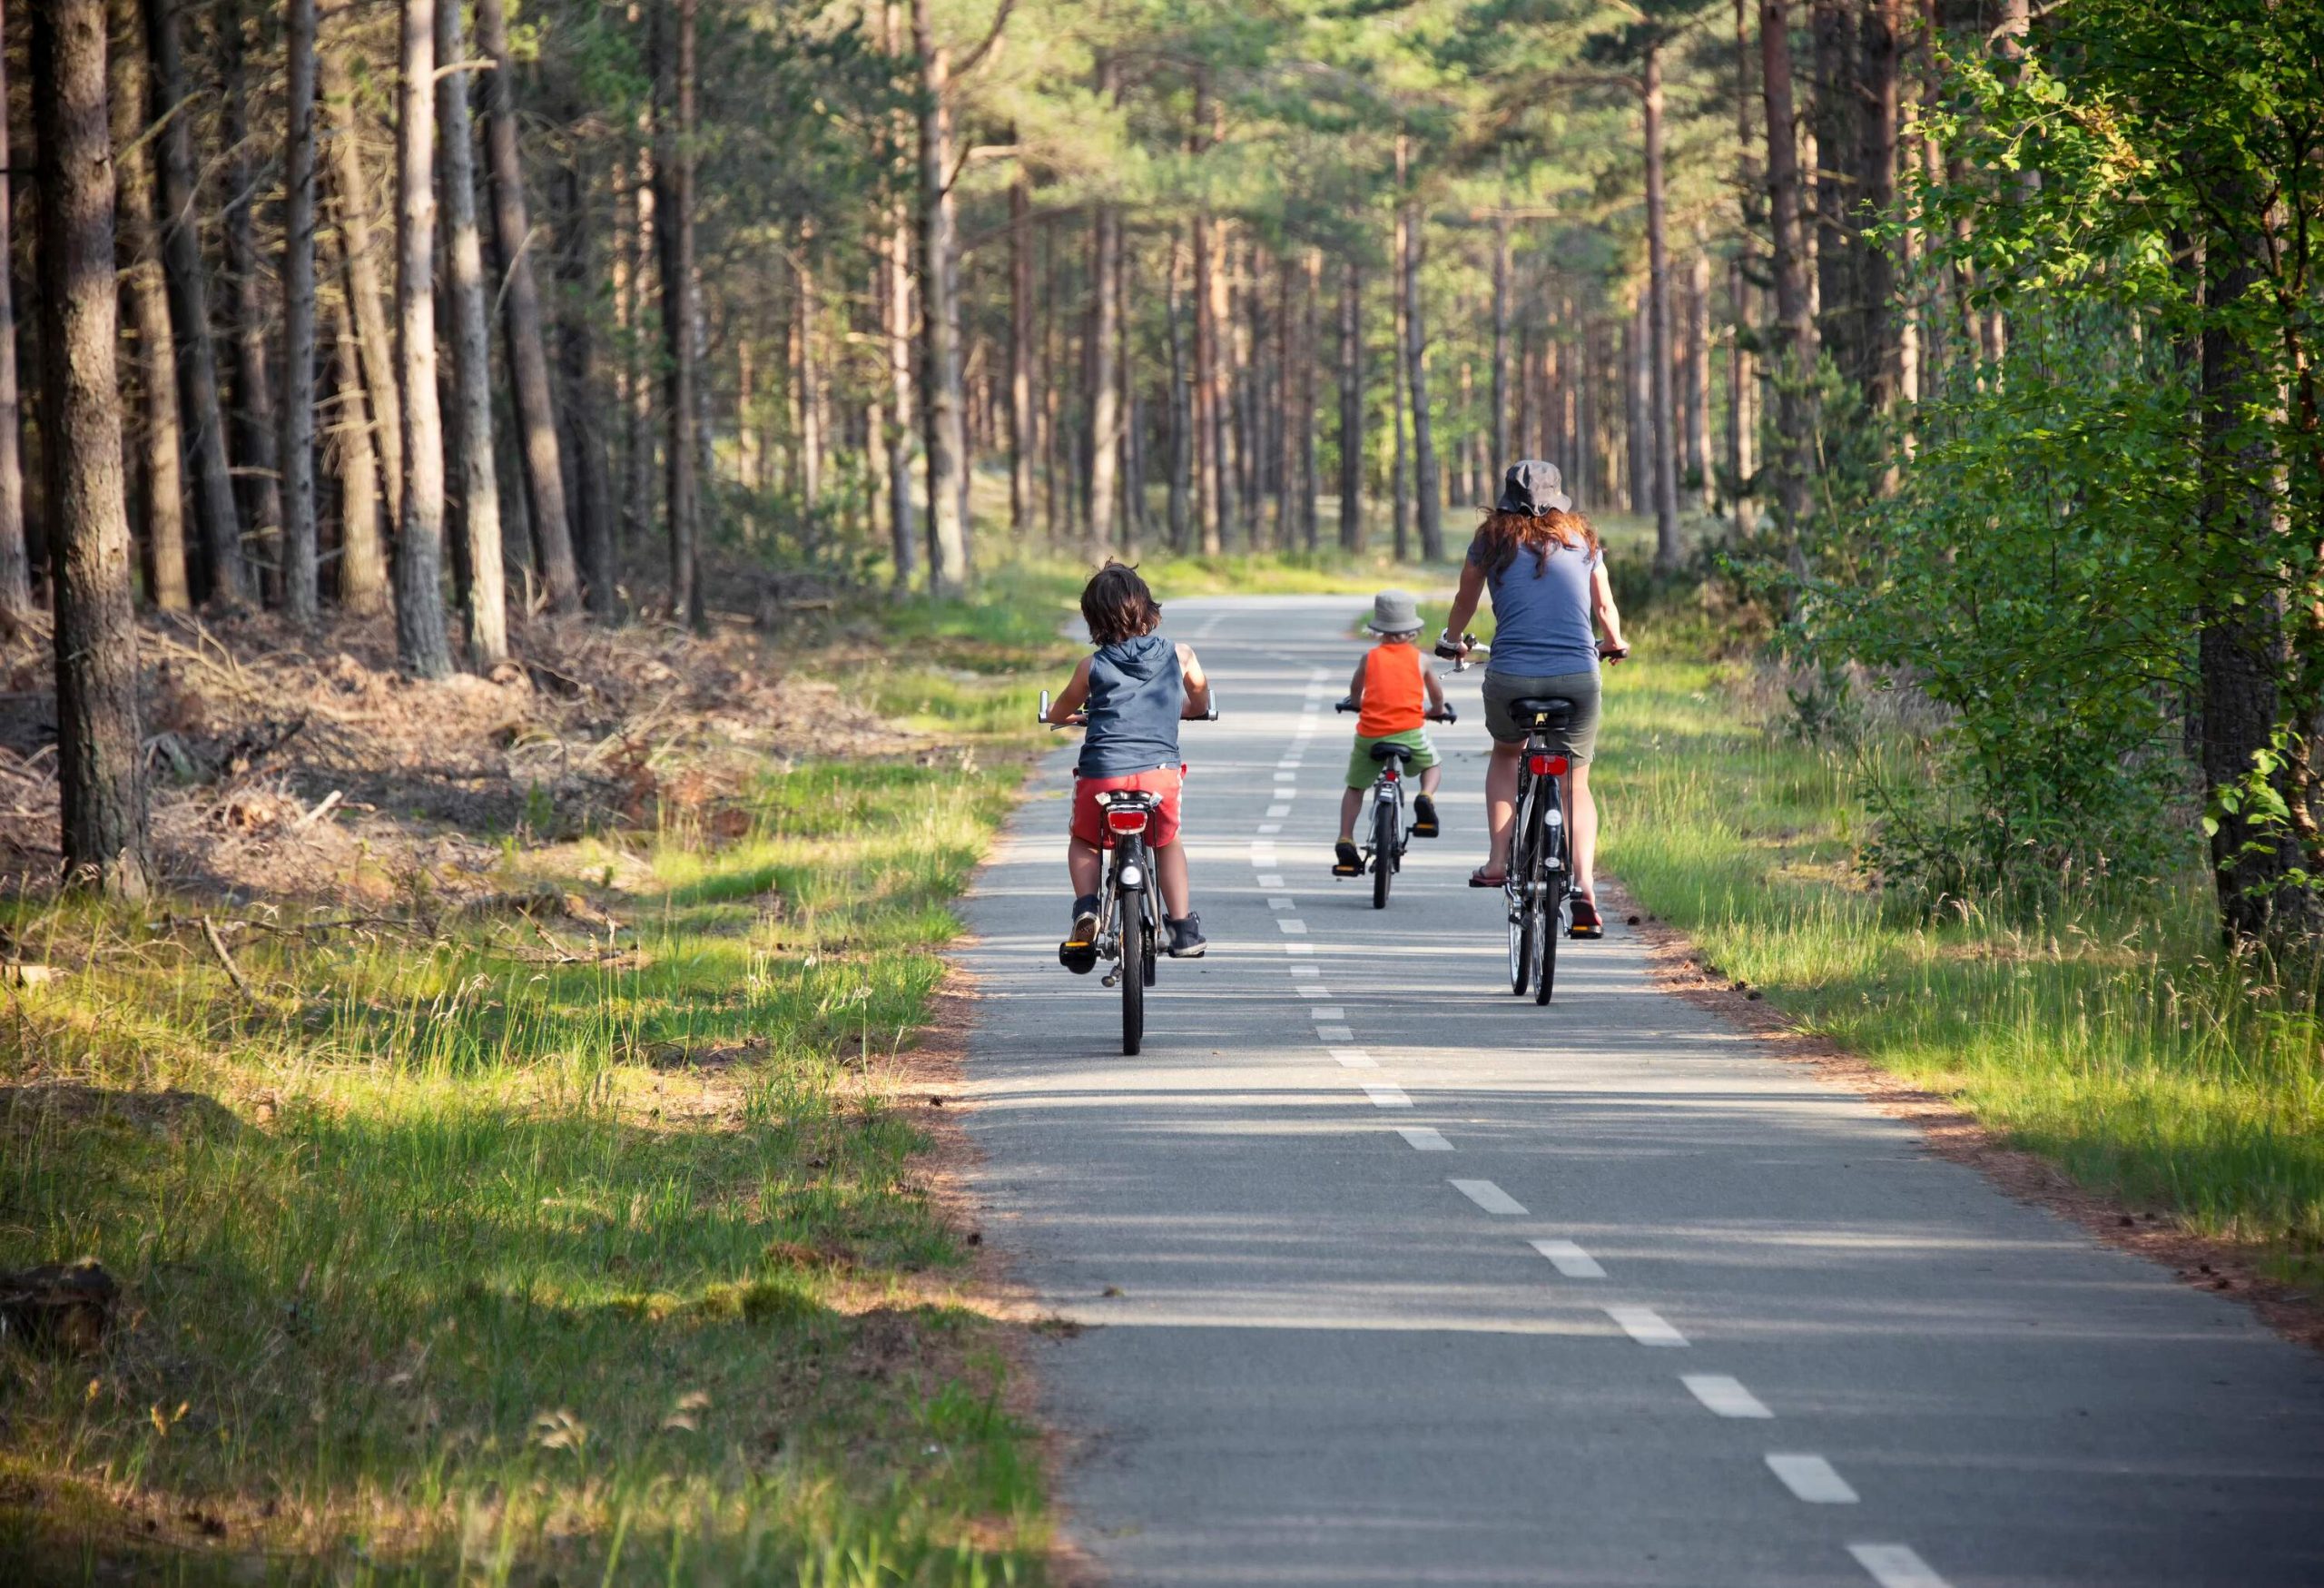 A woman and two kids riding their bikes on a narrow road through tall trees.